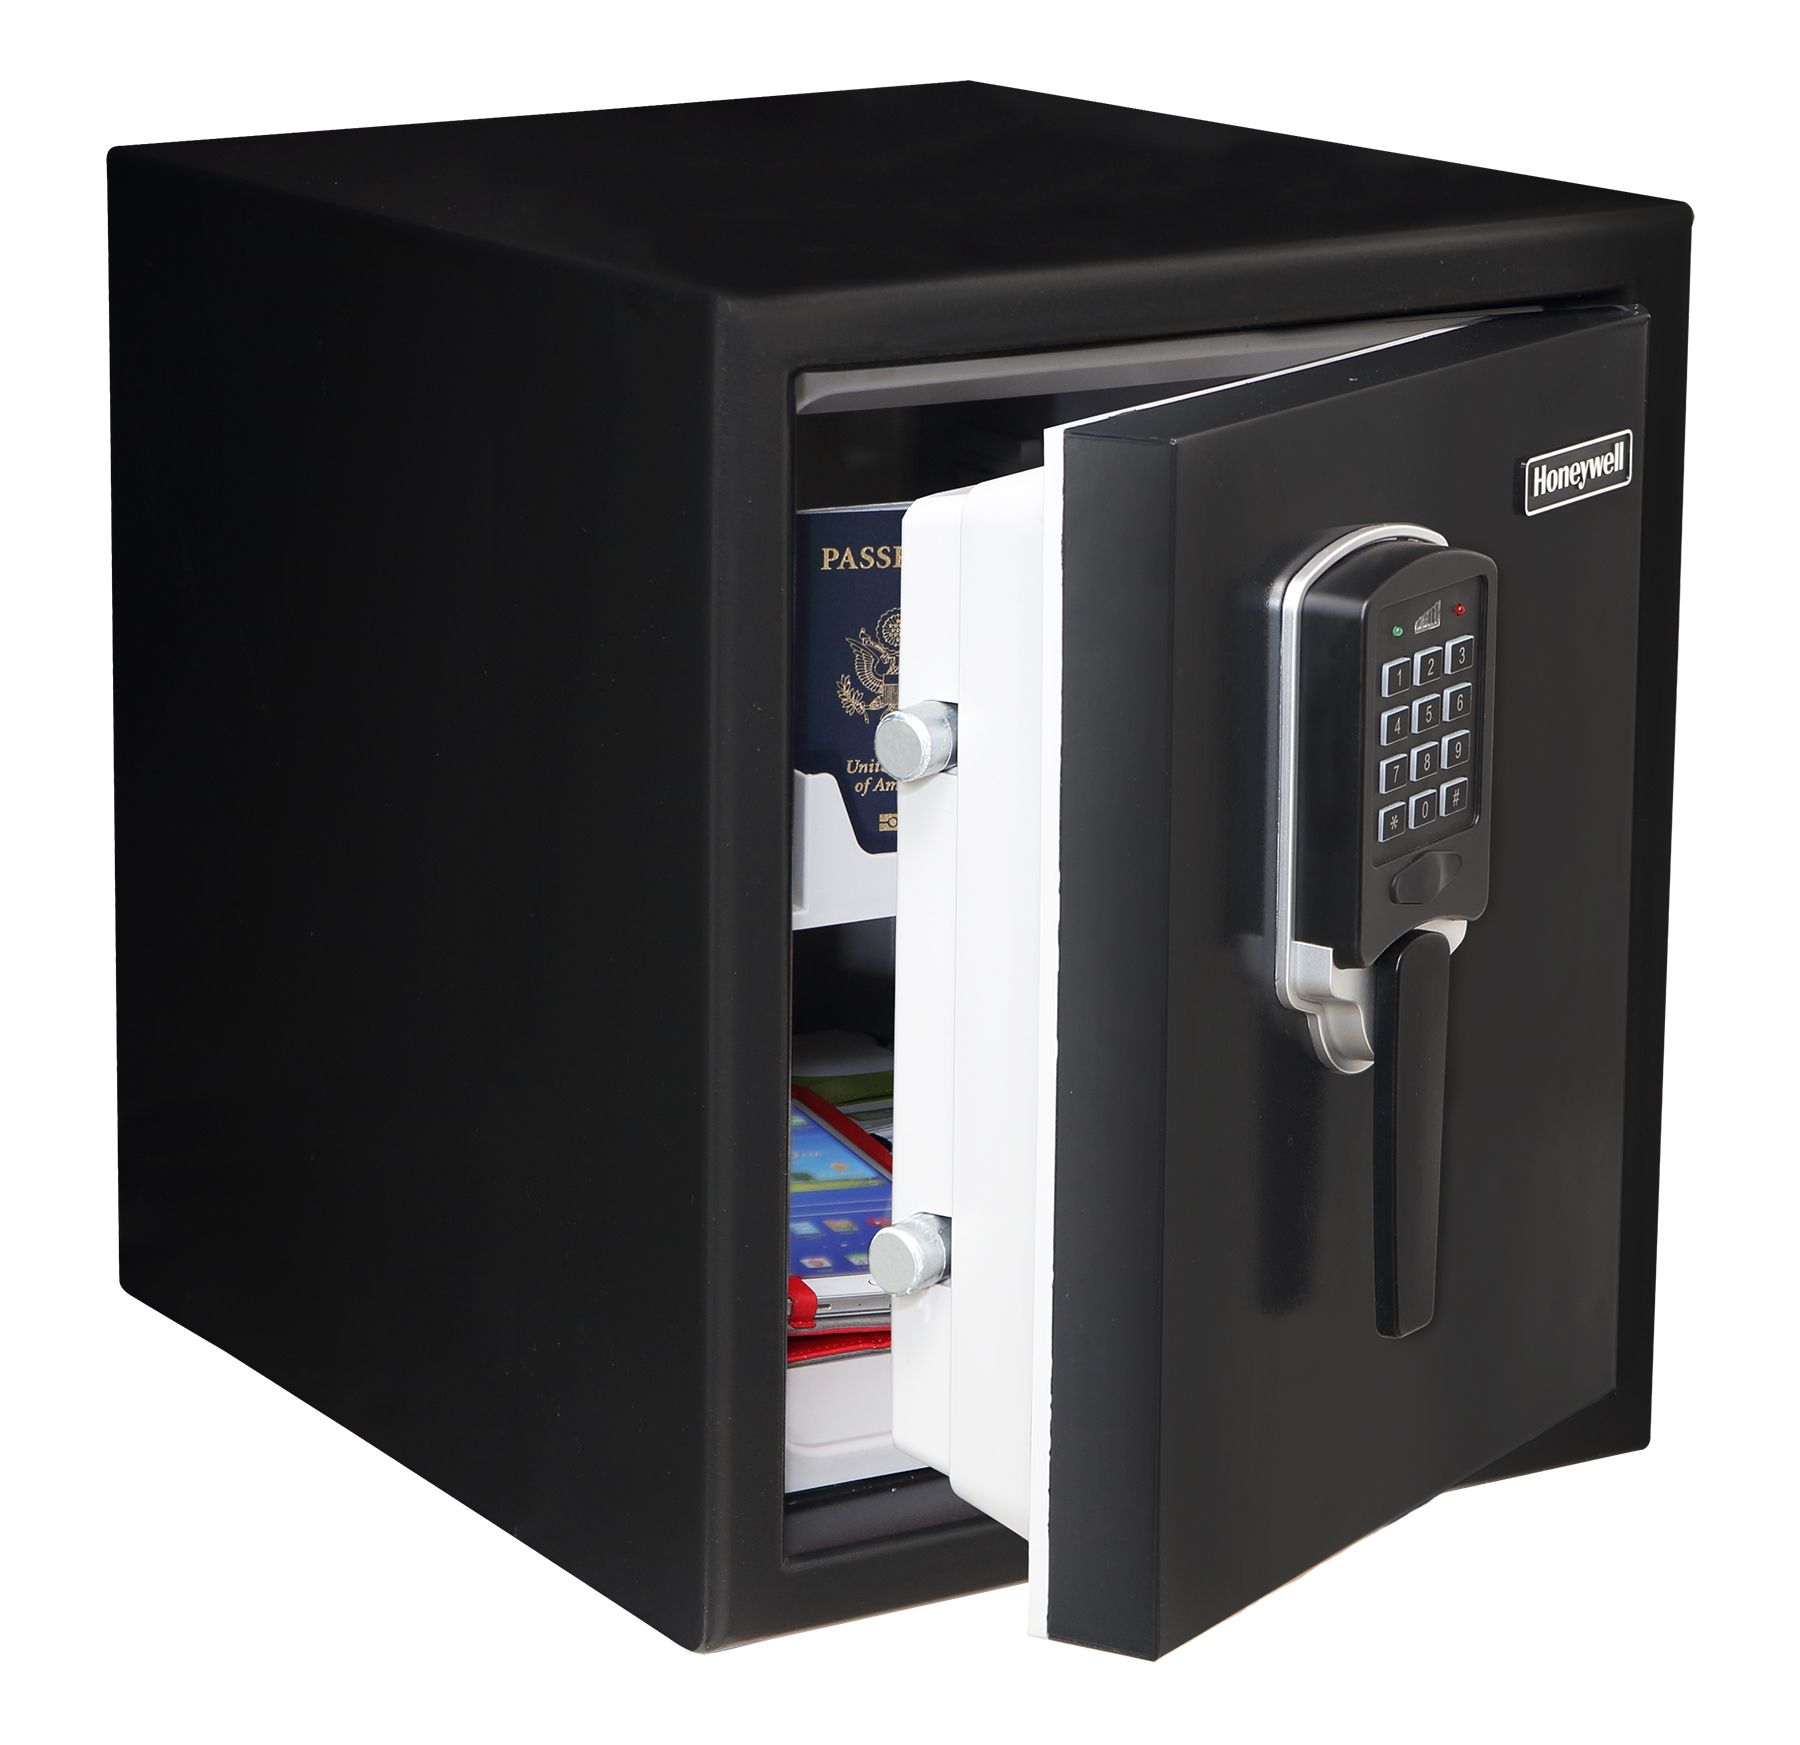 Honeywell 2605 Water- and Fire-Resistant Safe BJ's Wholesale Club